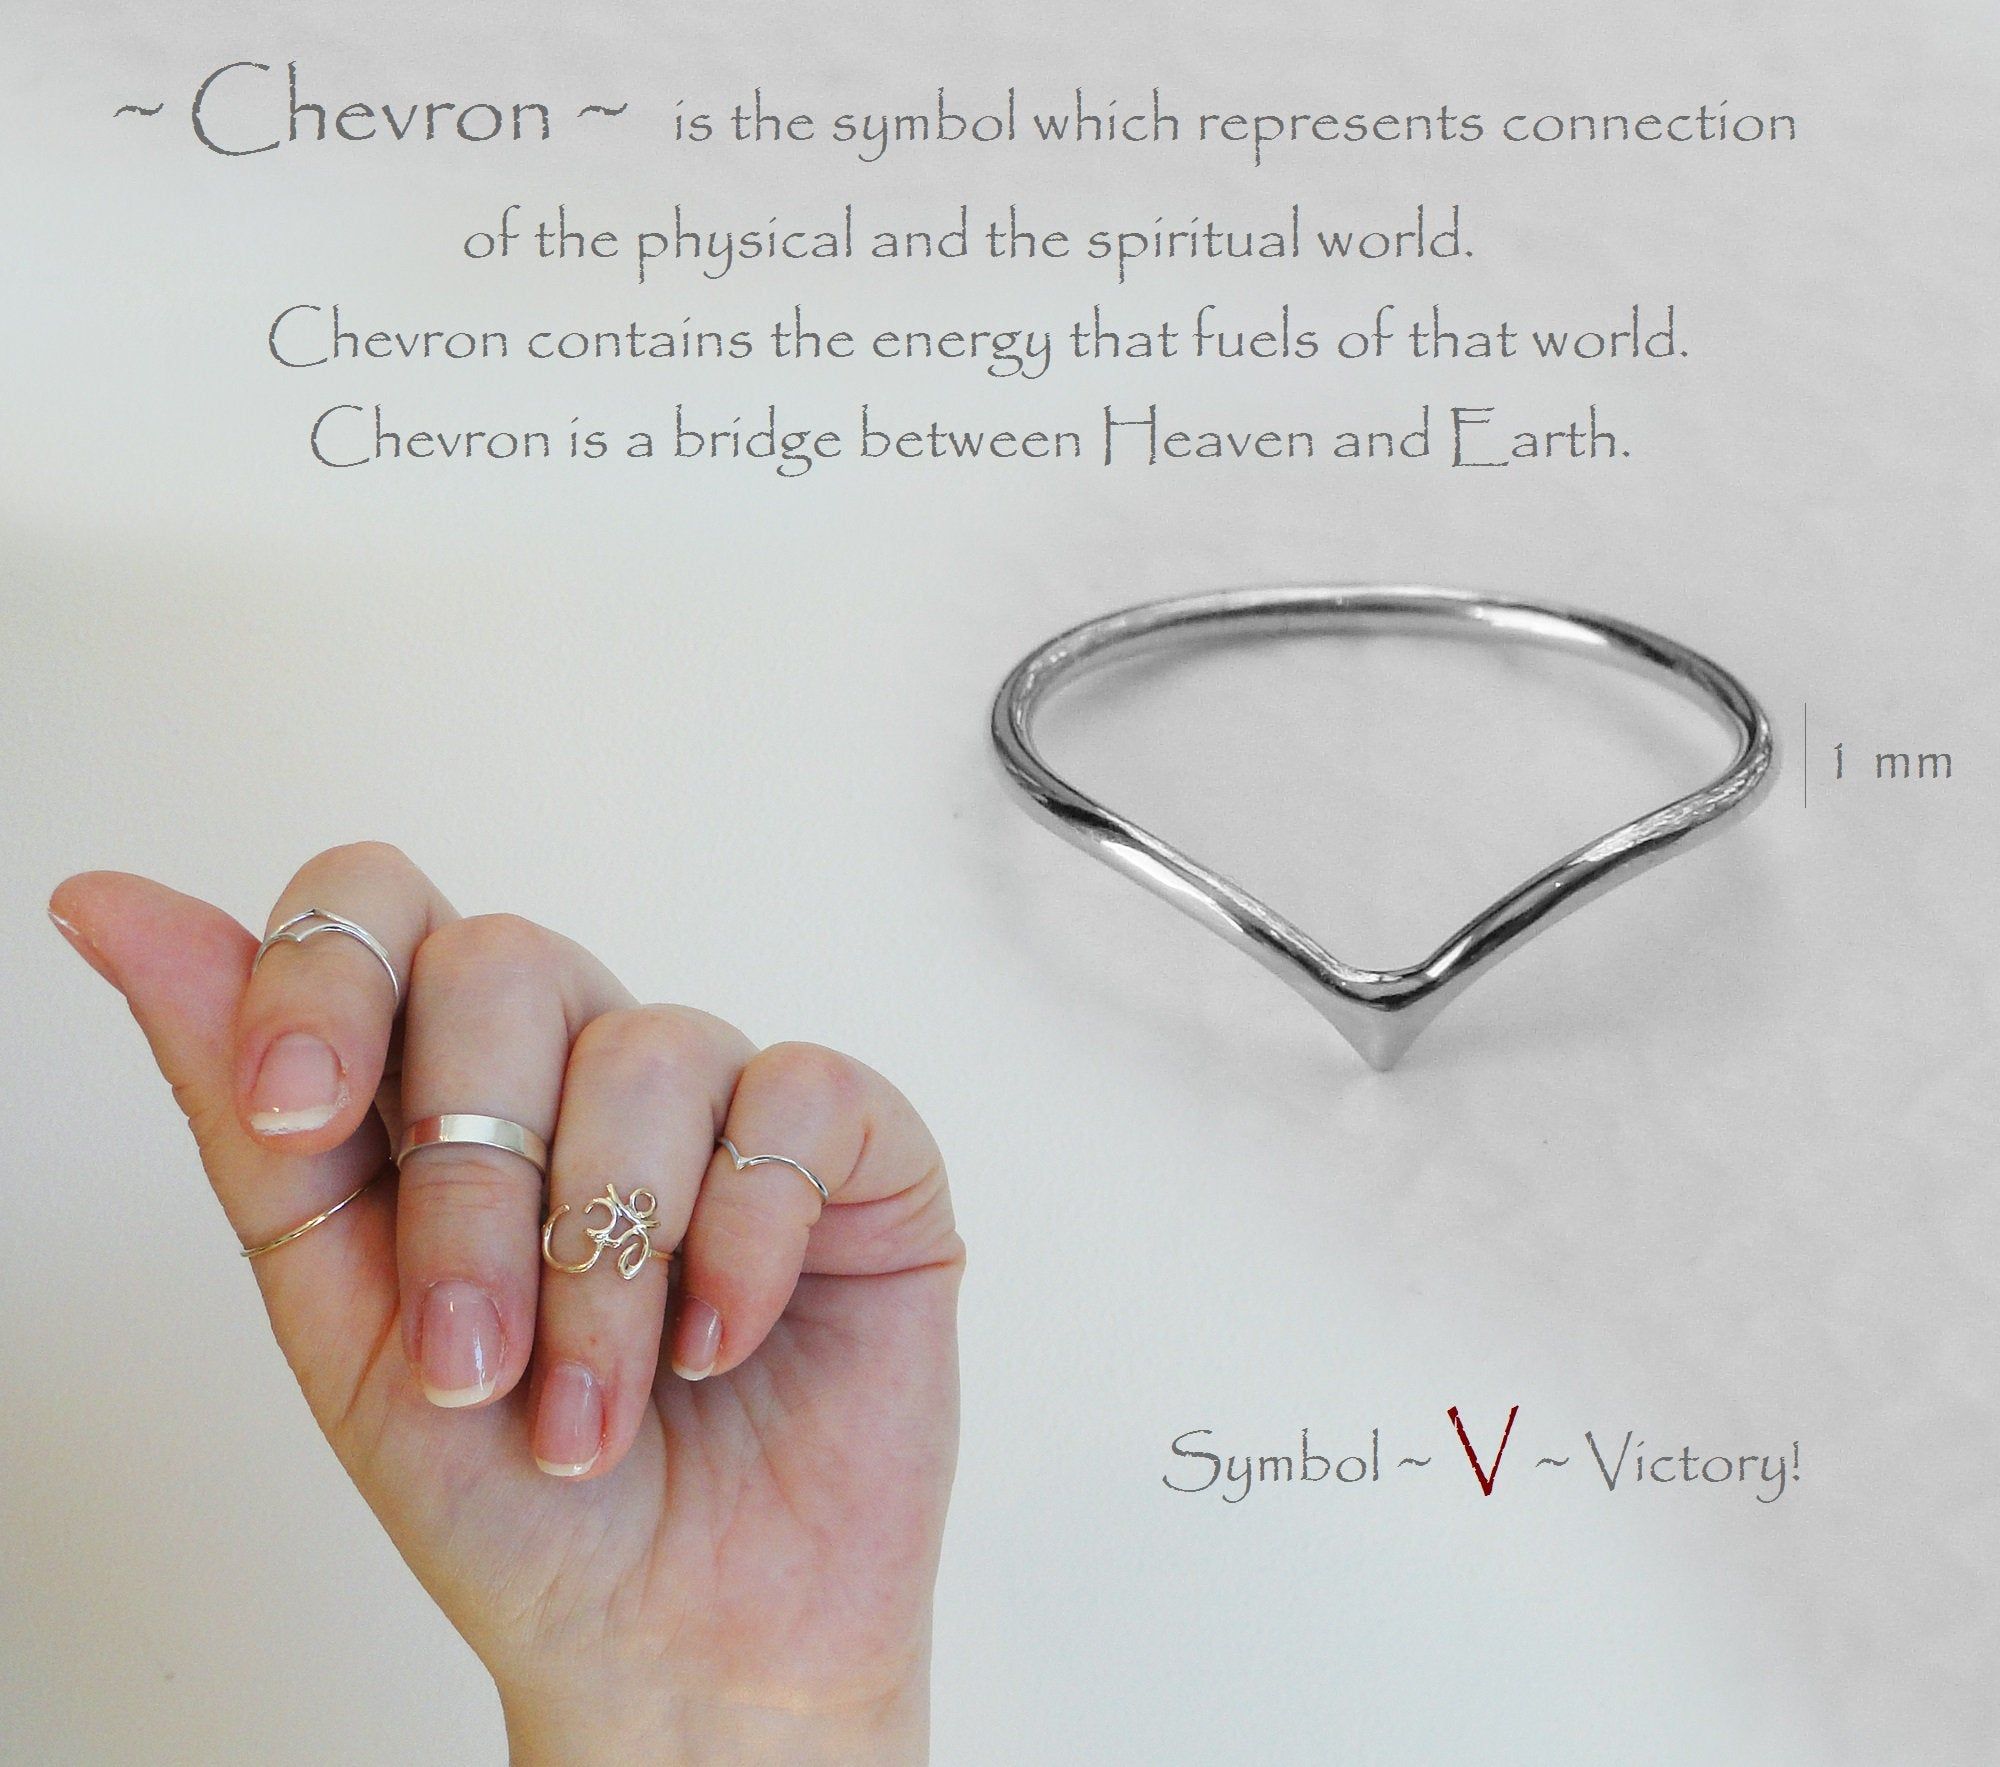 Chevron Ring 1 Mm Wishbone Tiara Delicate Sterling Silver Band Or Midi Ring  Symbol Of The Physical And The Spiritual World (View 10 of 25)